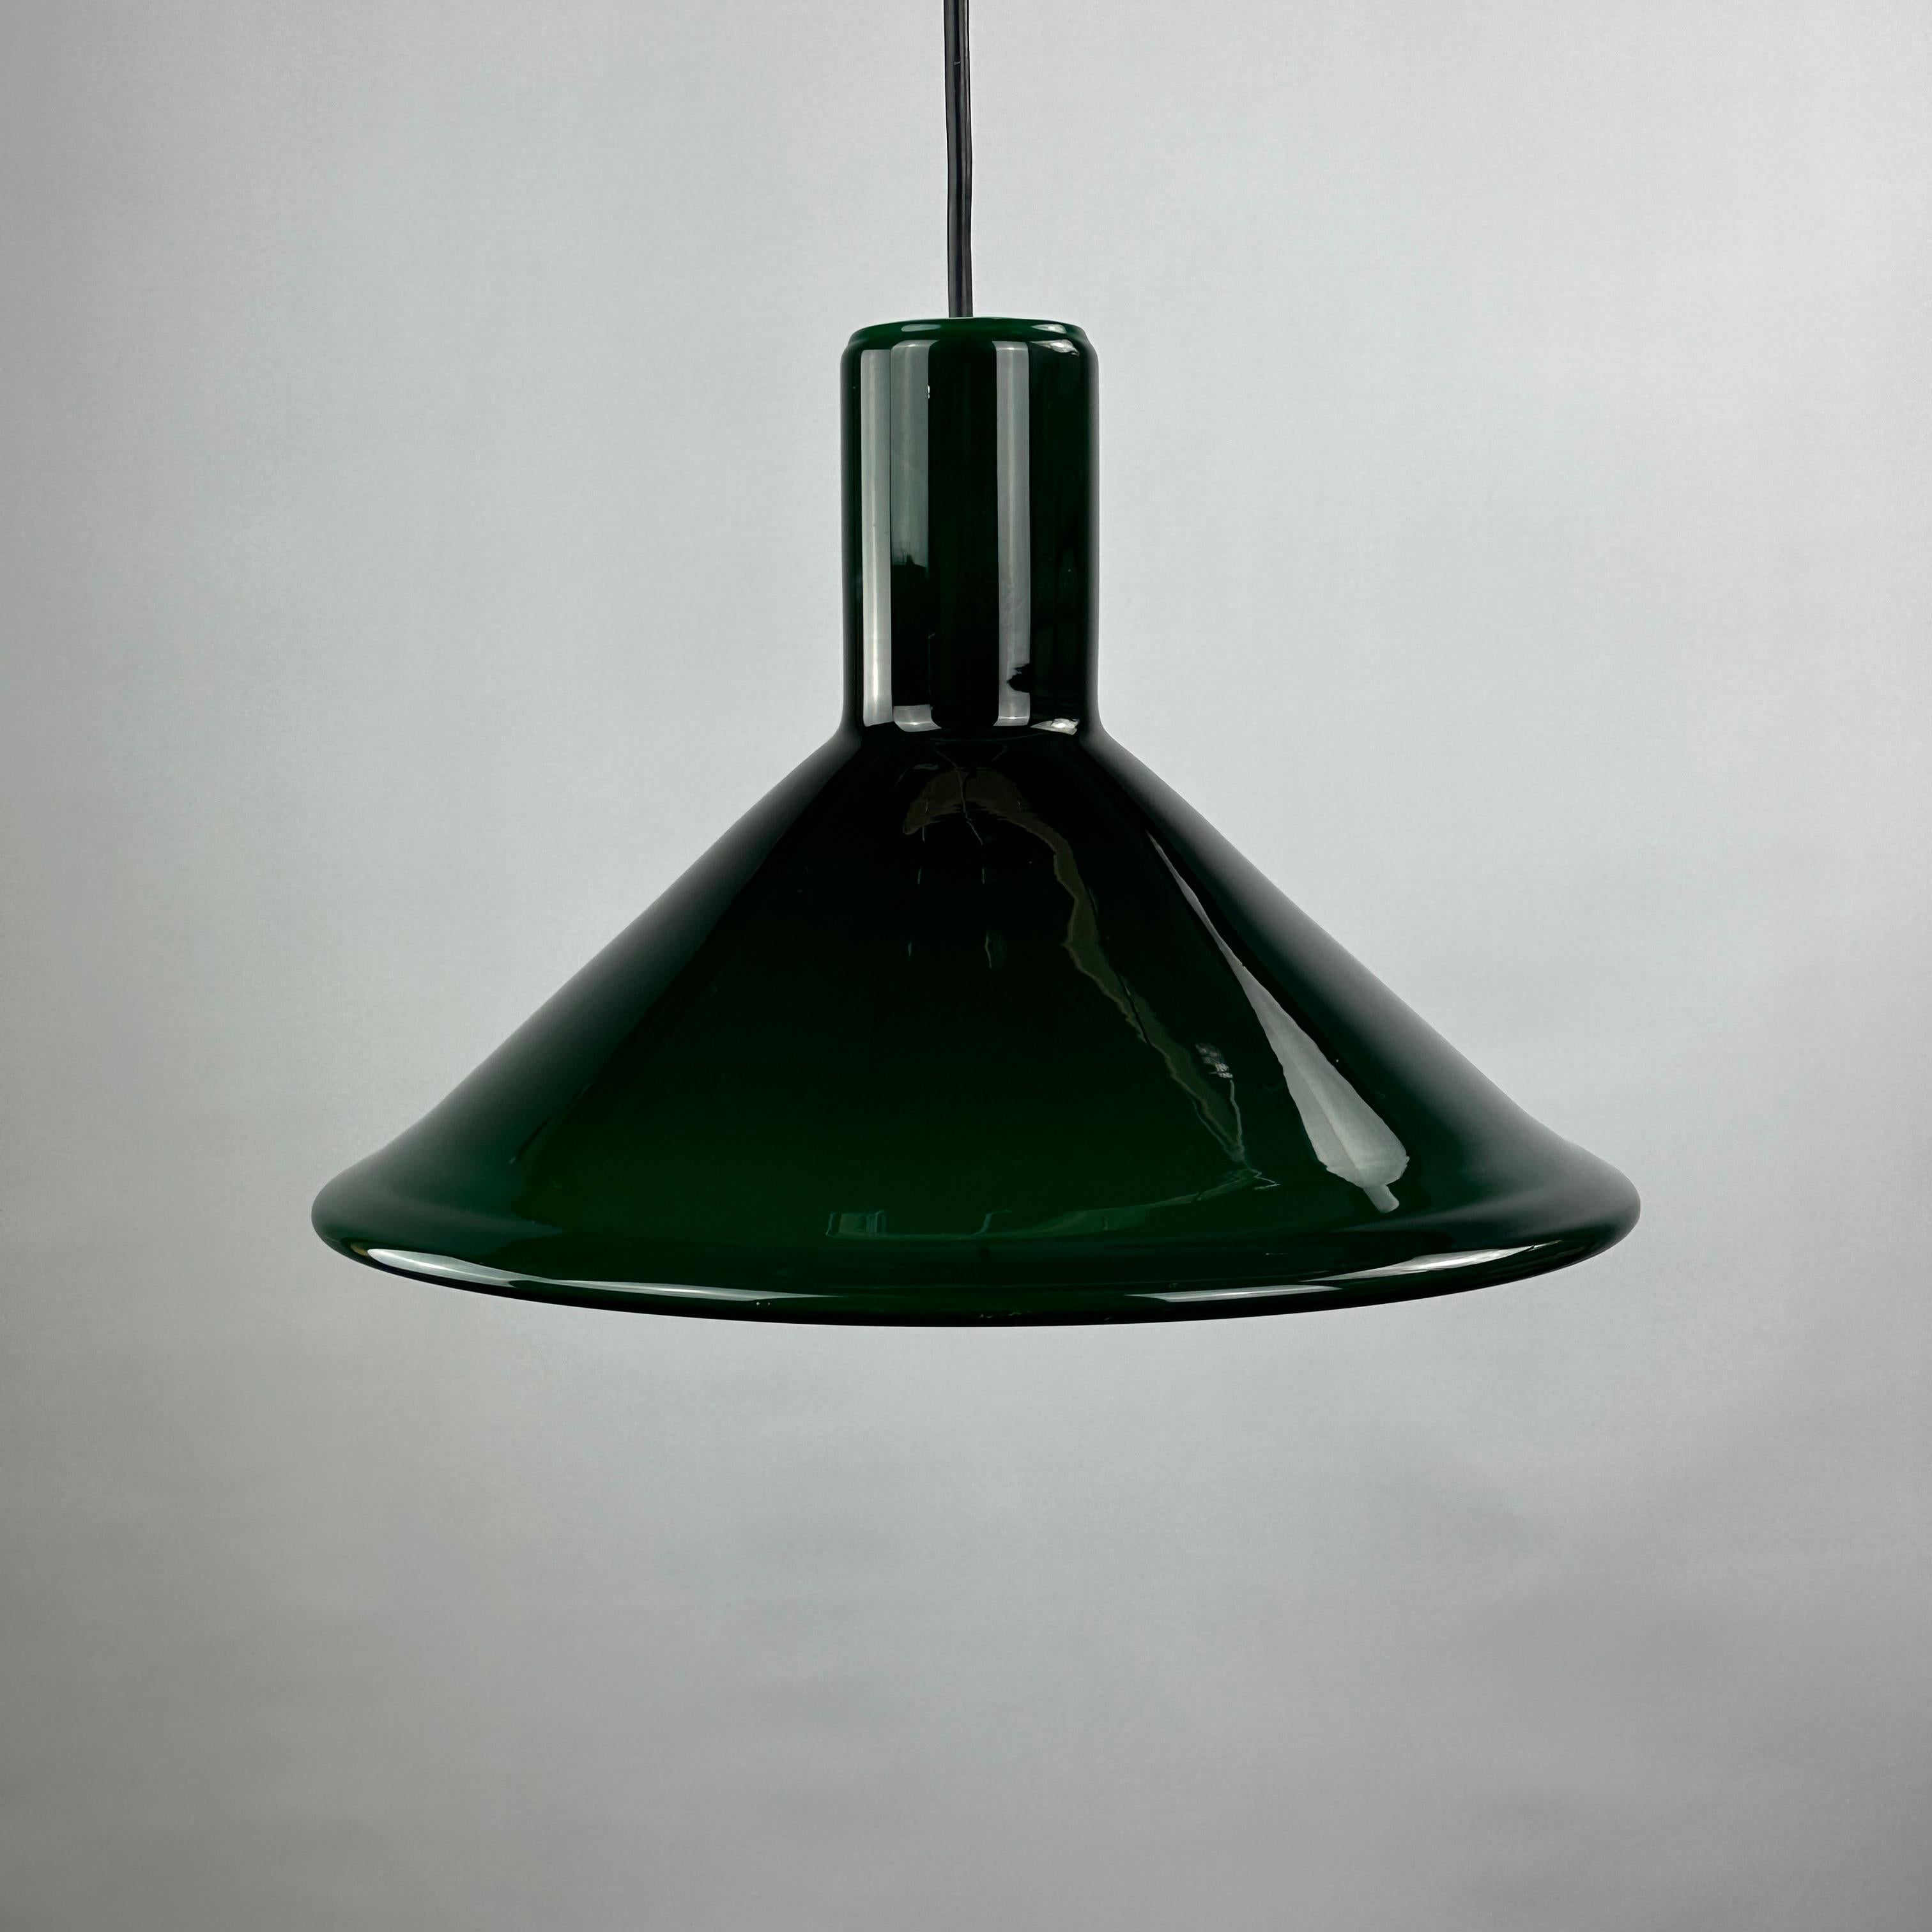 Green Danish glass pendant light Model P & T by Michael Bang for Holmegaard 1972 For Sale 2